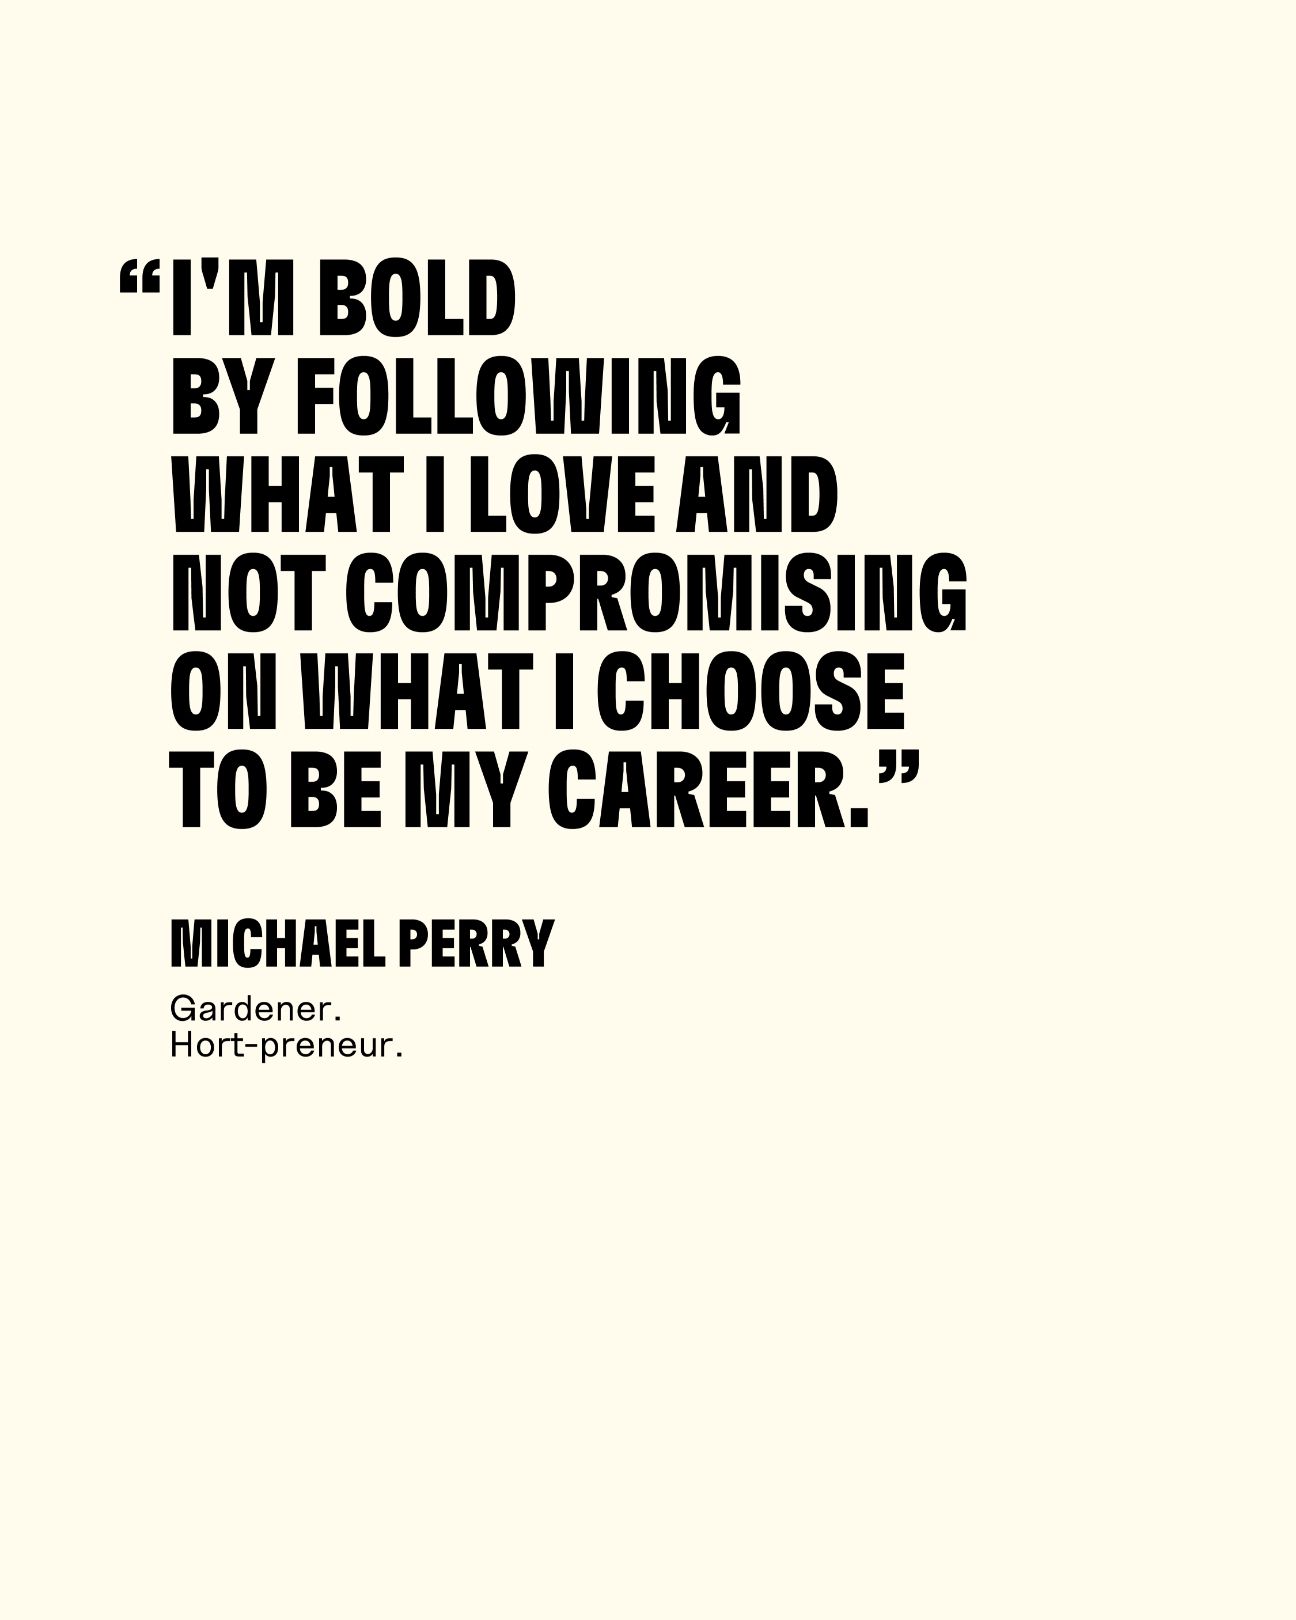 I'm bold by following what I love and not compromising on what I choose to be my career. Michael Perry Gardener, Hort-proneur